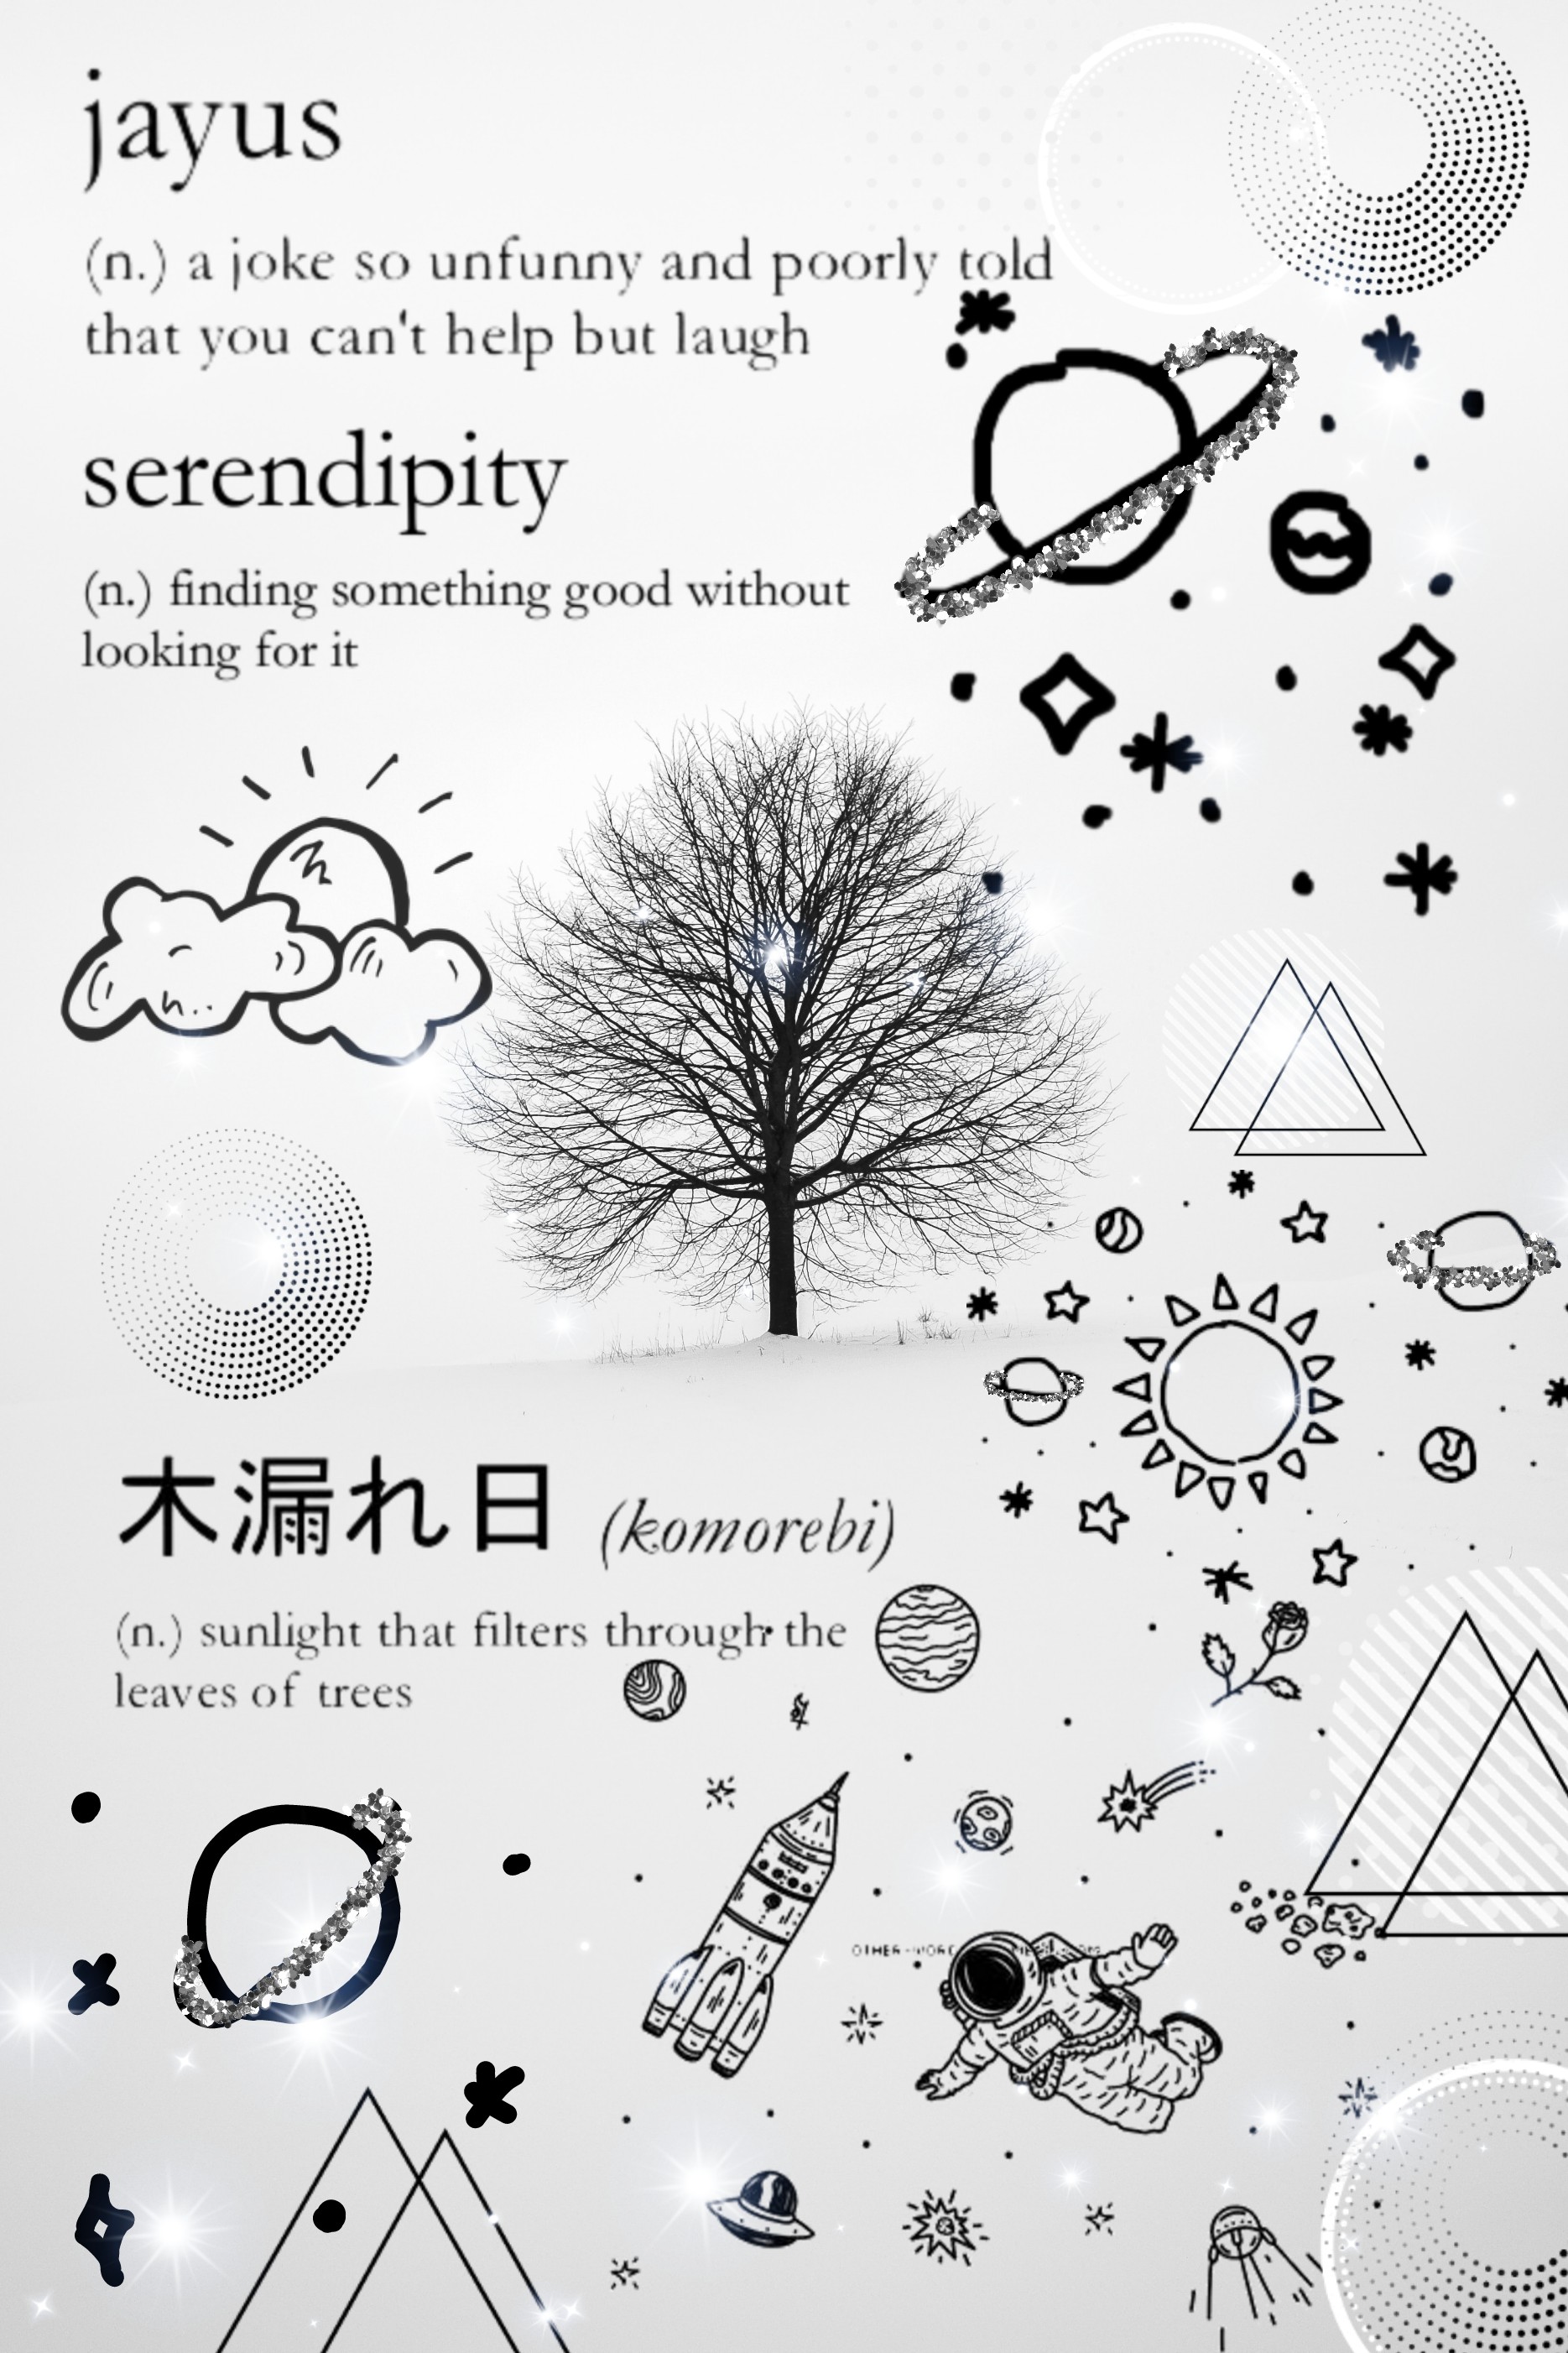 Serendipity means